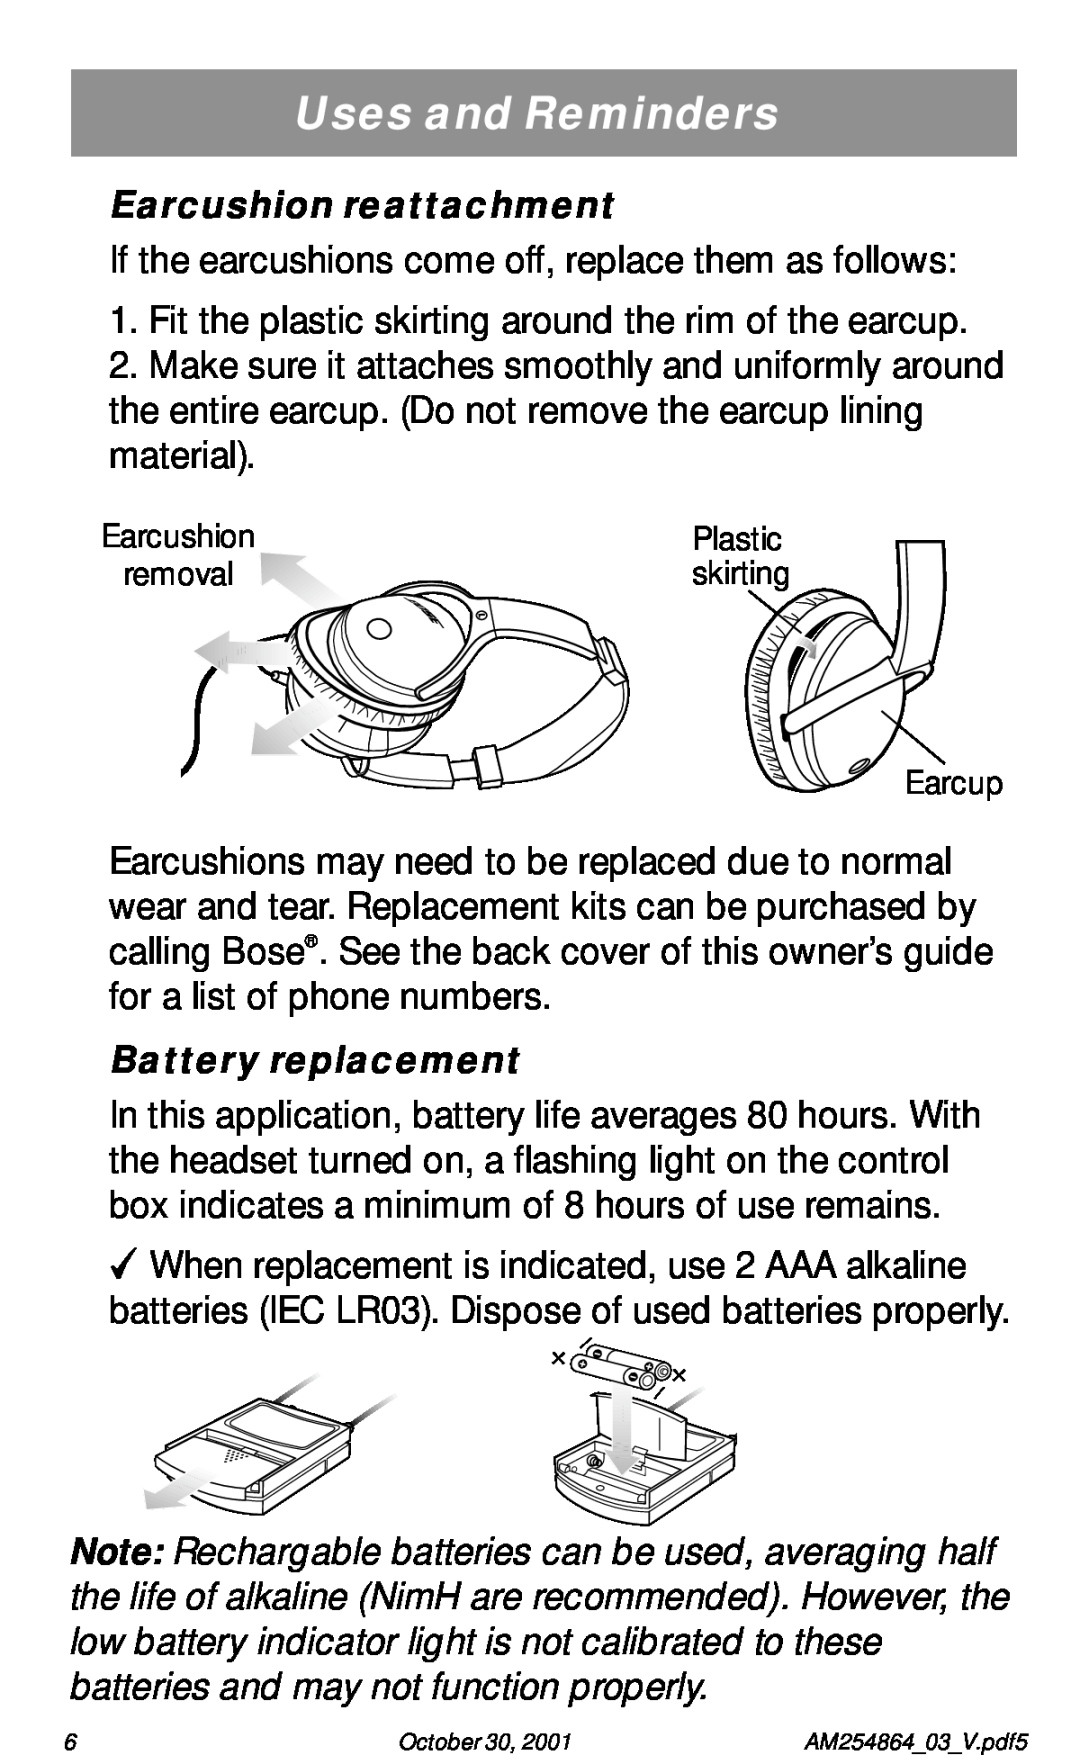 Bose Acoustic Noise Cancelling Headset manual Earcushion reattachment, Battery replacement, Uses and Reminders 